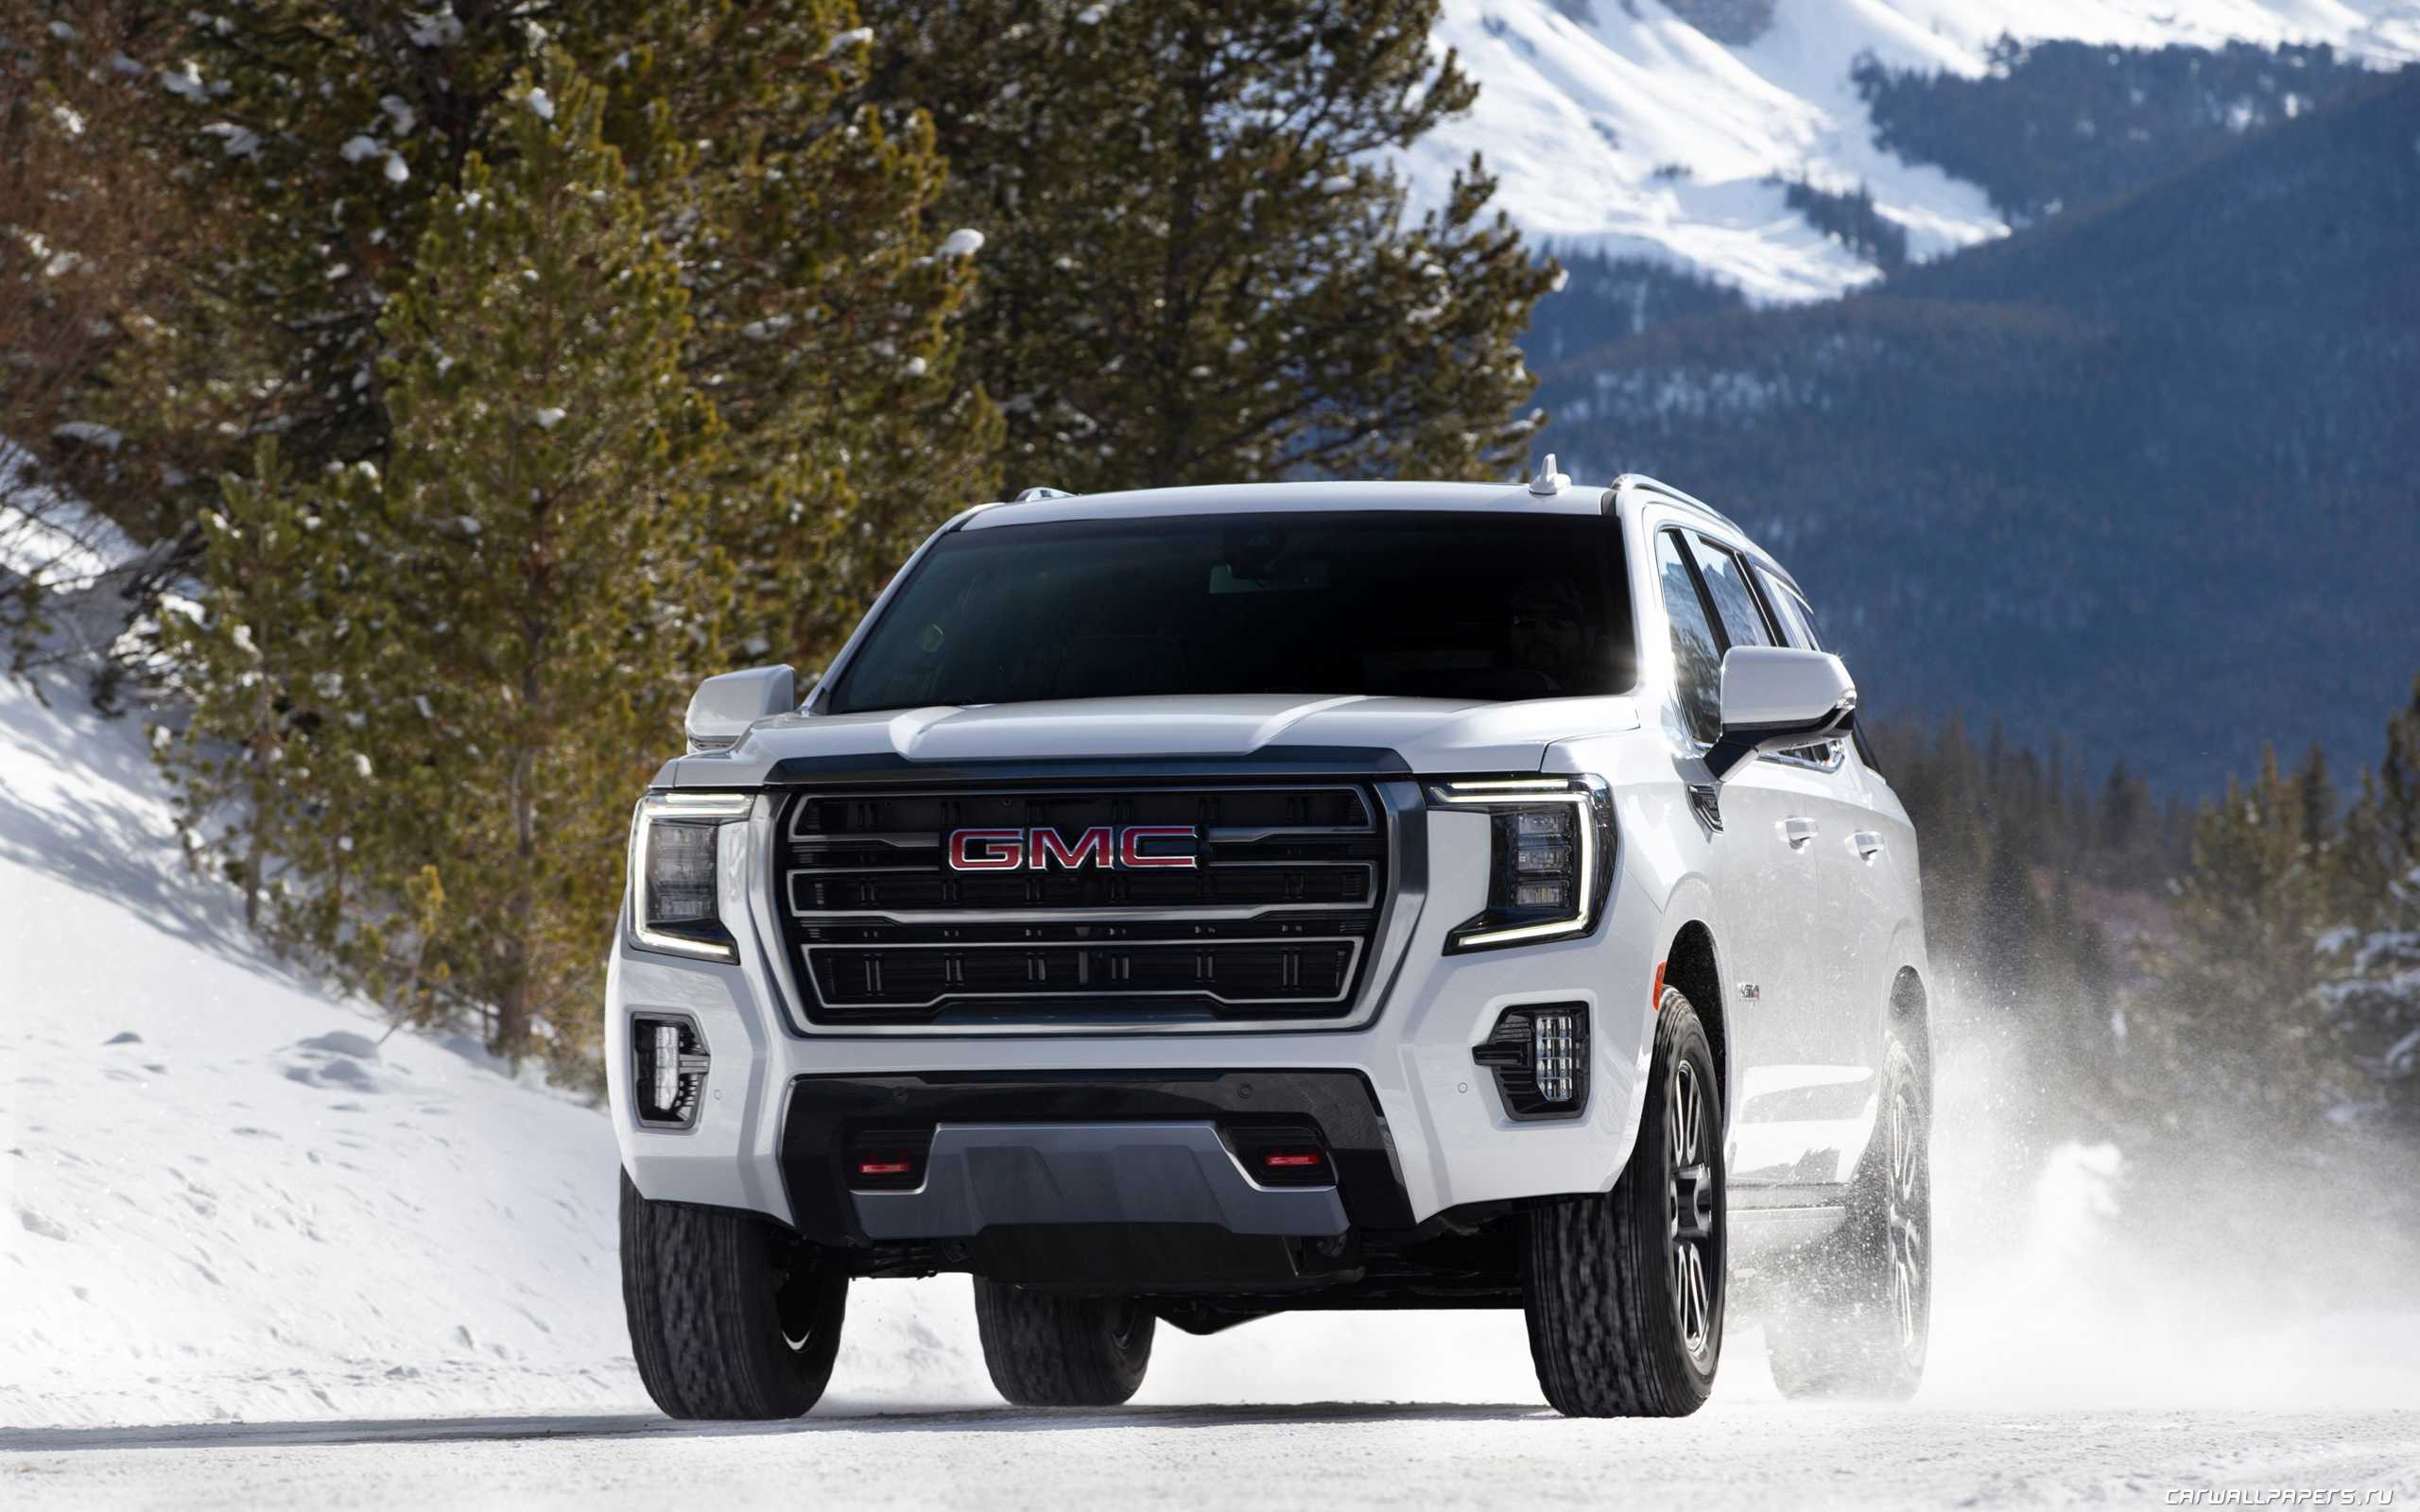 Gmc yukon vs chevy tahoe: here's how they stack up against each other